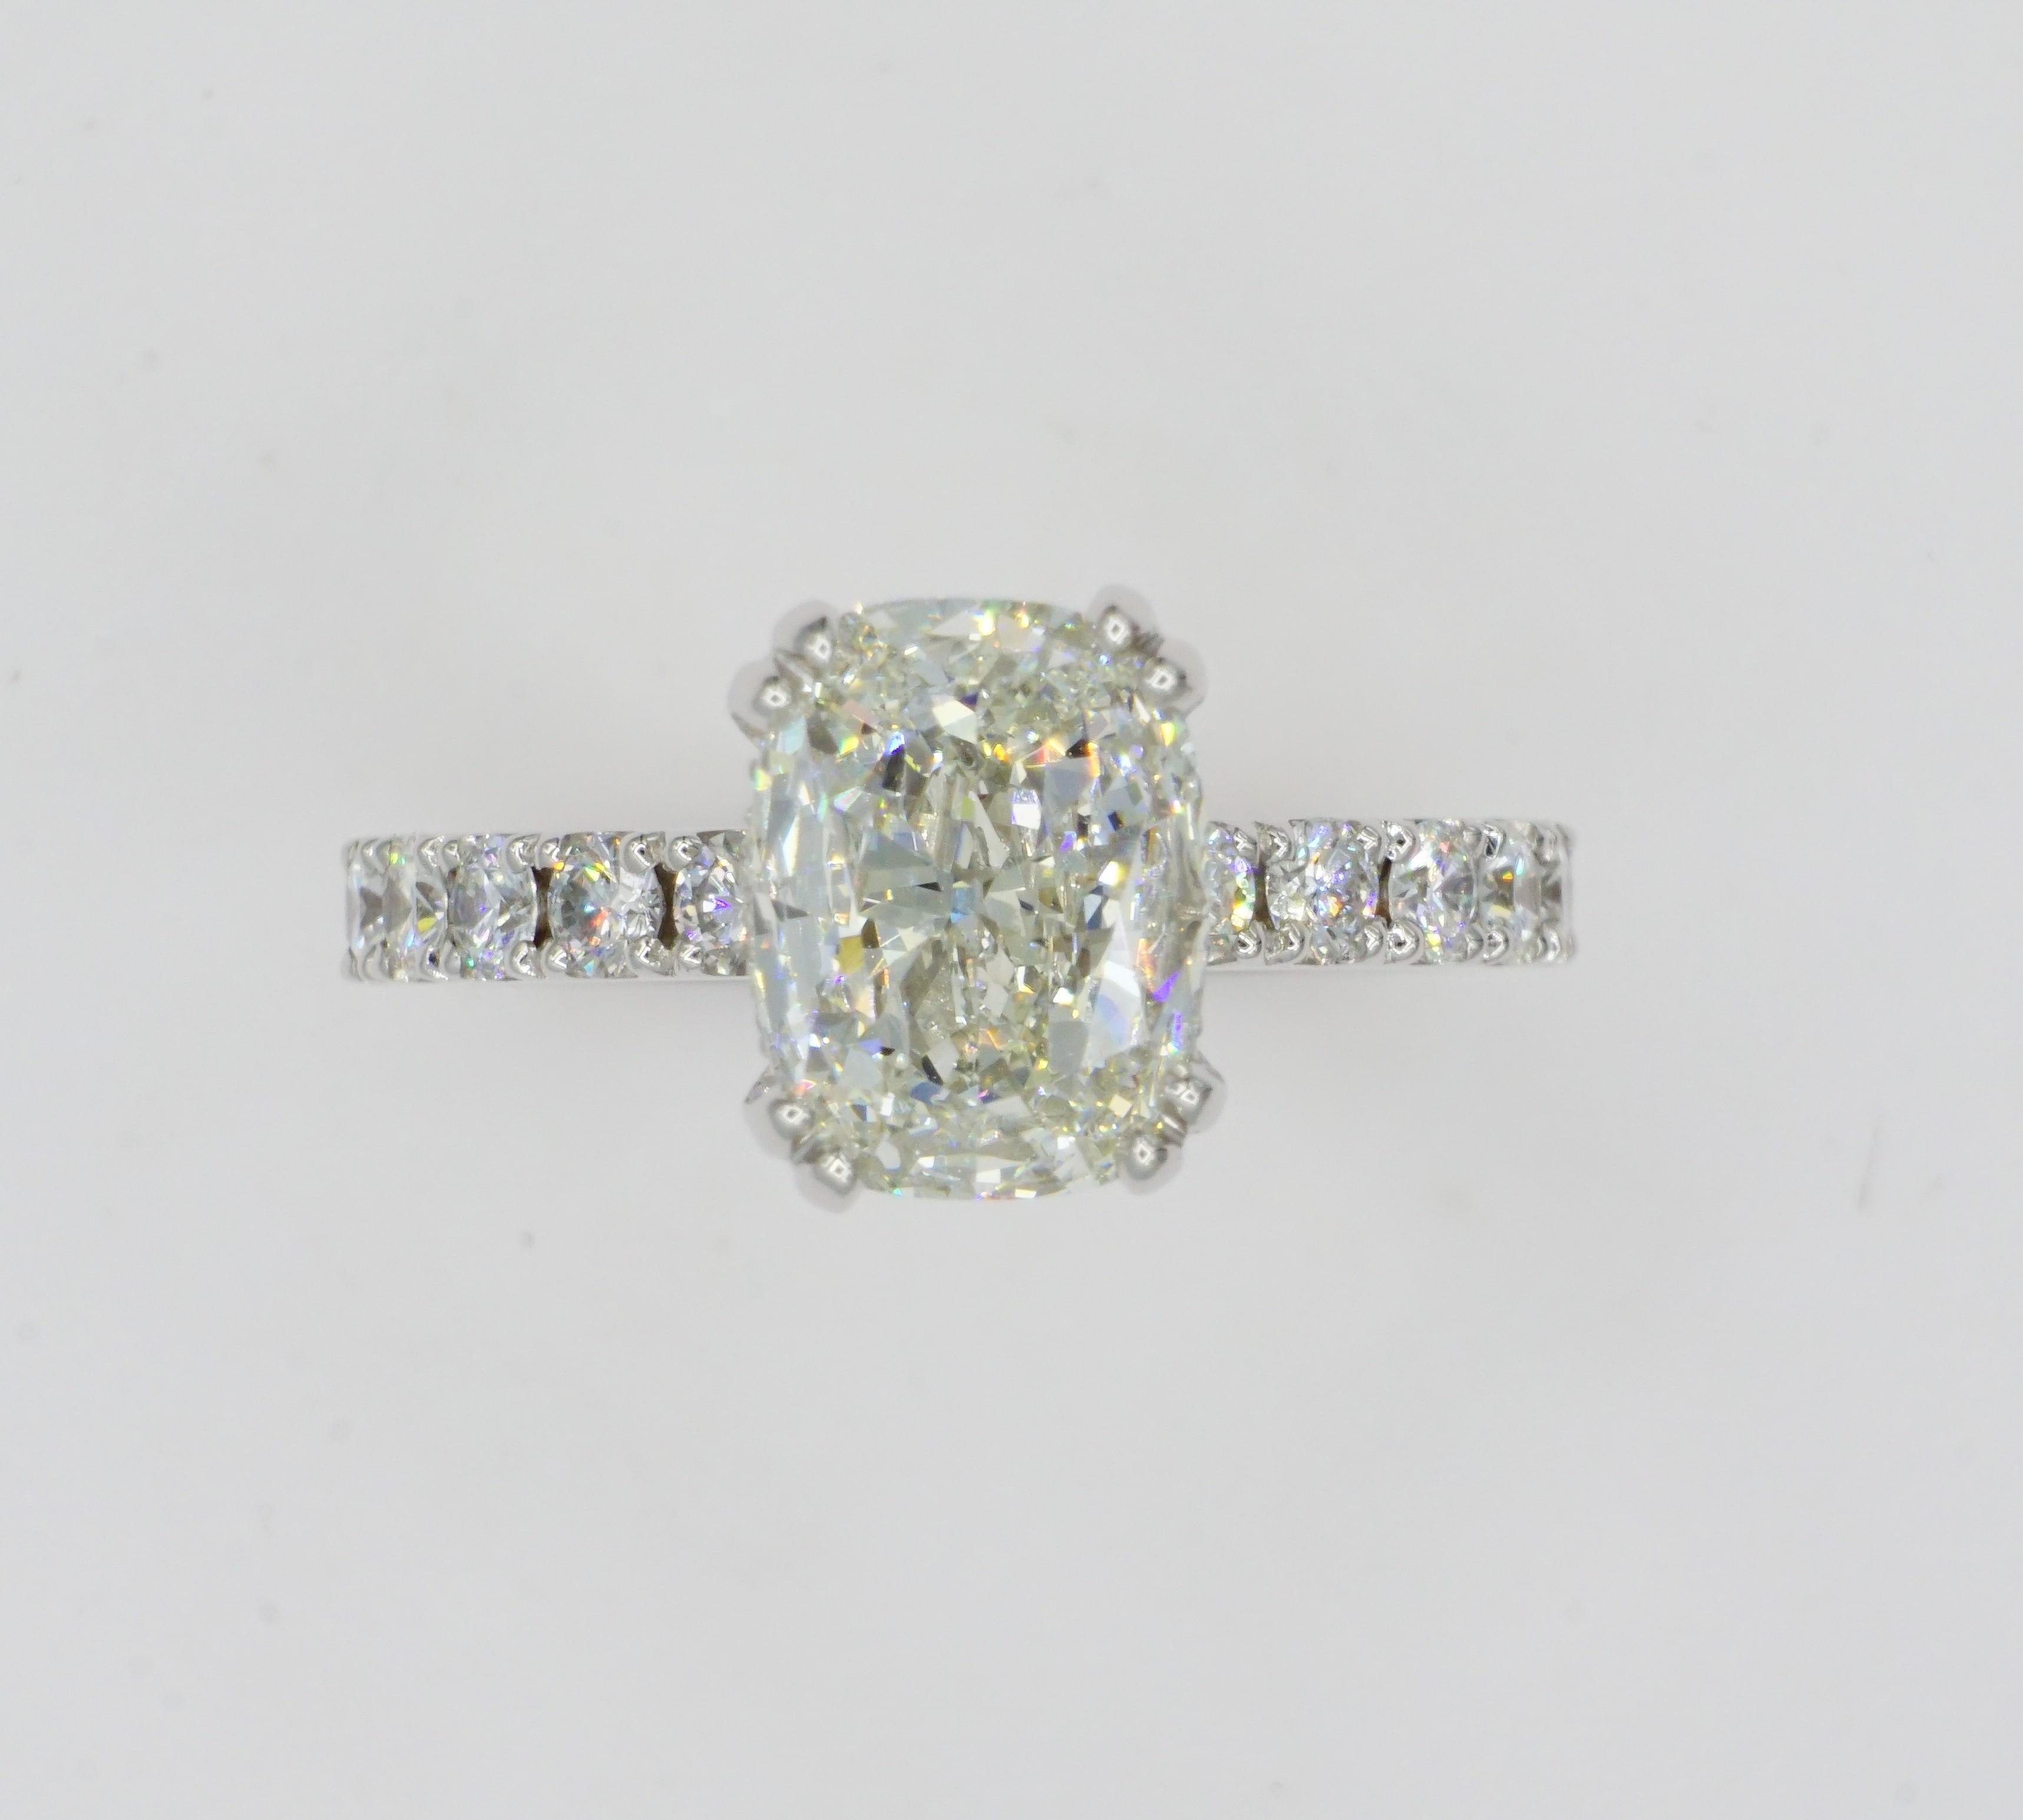 Platinum 1.75ct Cushion Diamond Engagement Ring, GIA-Certified, Designer RGC New In Excellent Condition For Sale In Rancho Santa Fe, CA